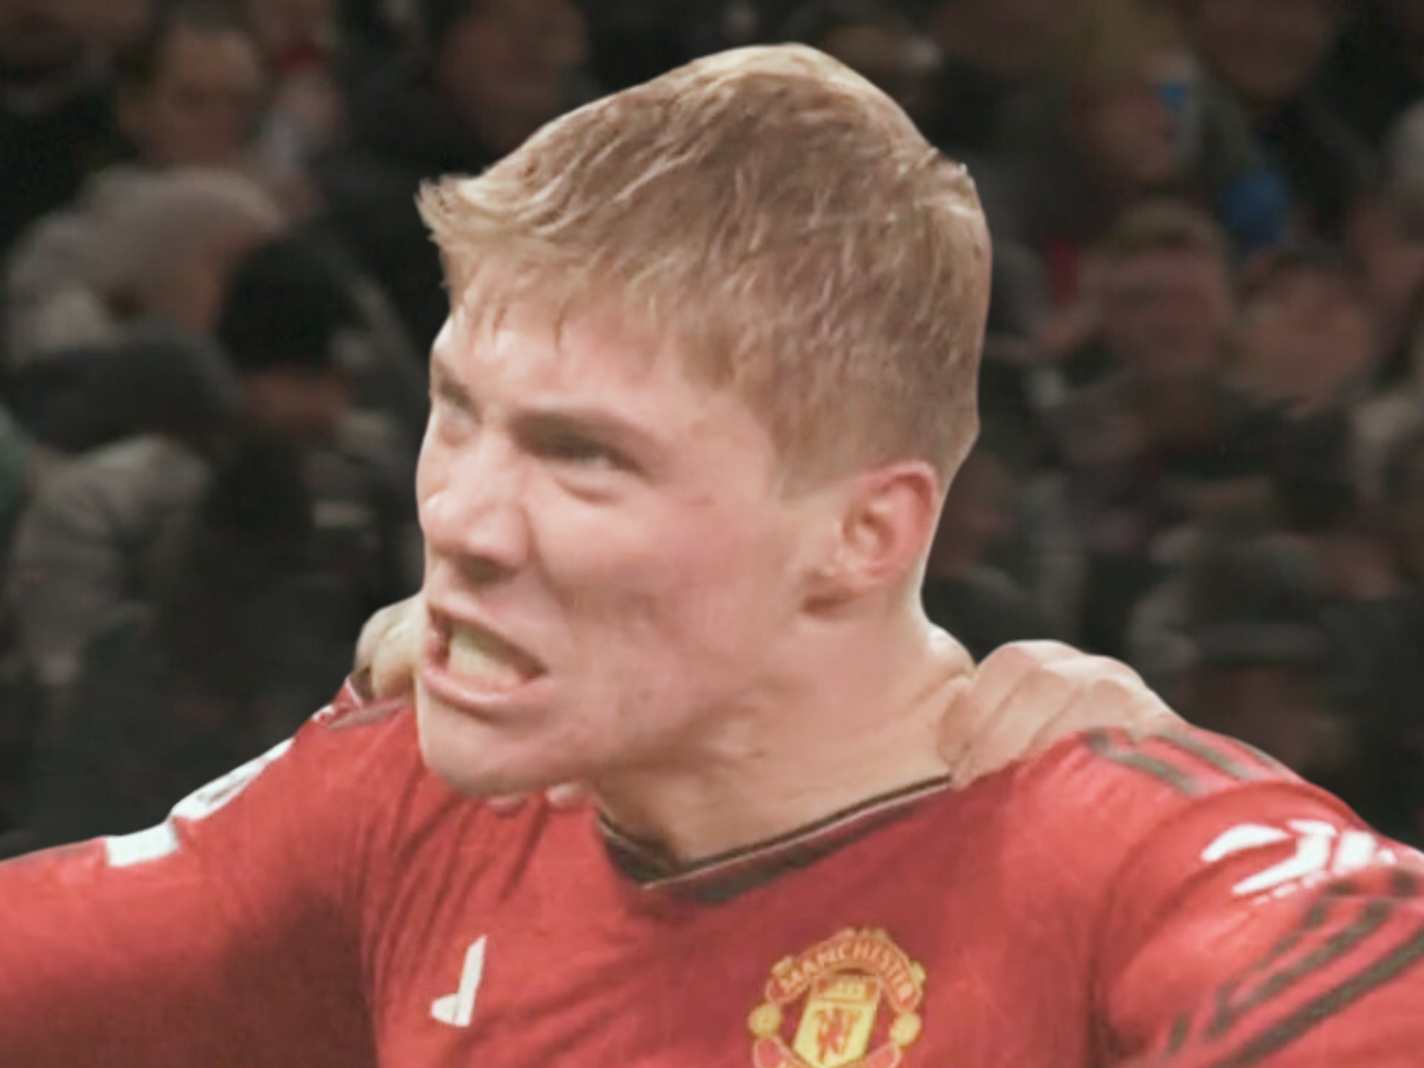 Pure passion on Rasmus Hojlund's face after scoring his first goal for Man United